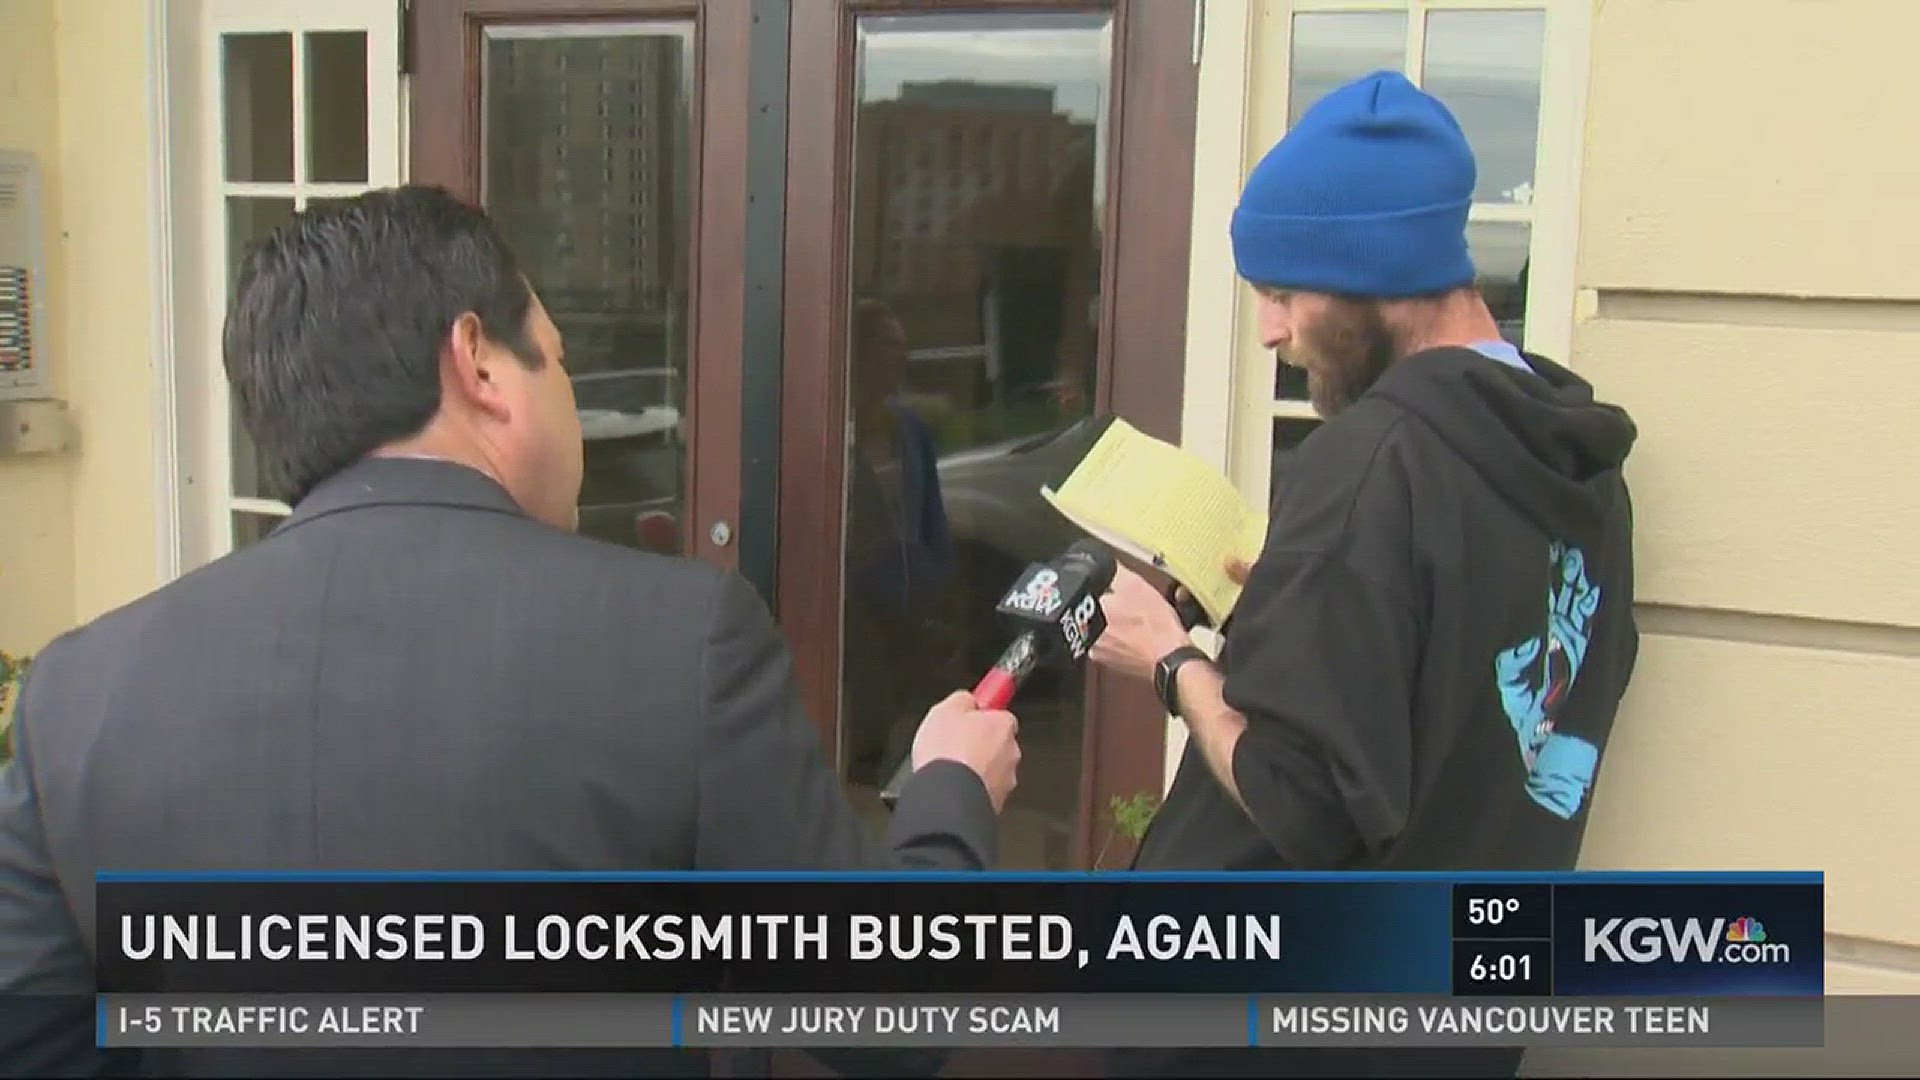 Unlicensed locksmith busted again